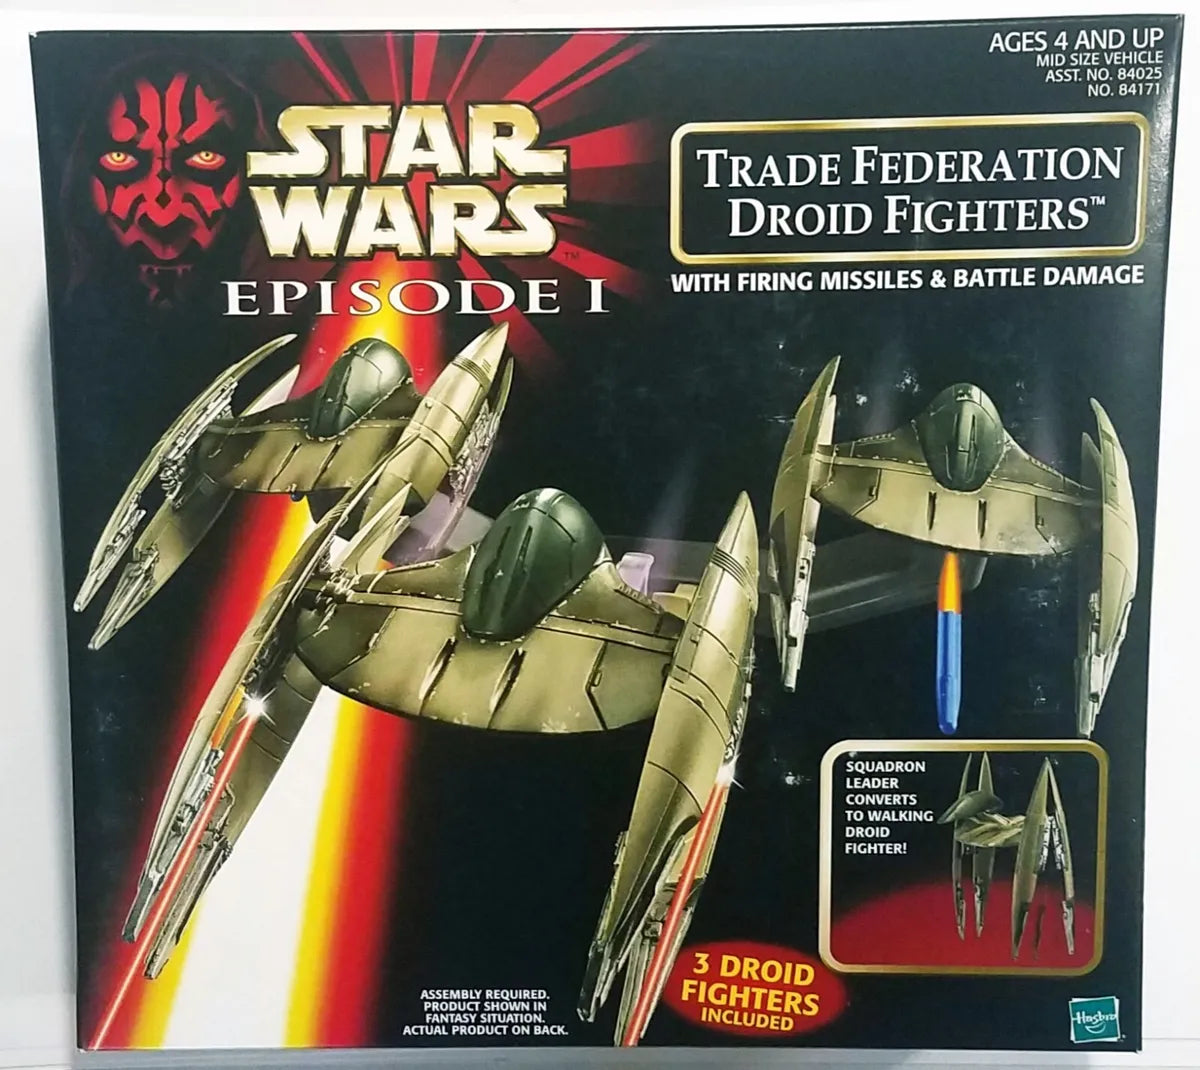 1998 Hasbro Star Wars Episode 1 Trade Federation Droid Fighters